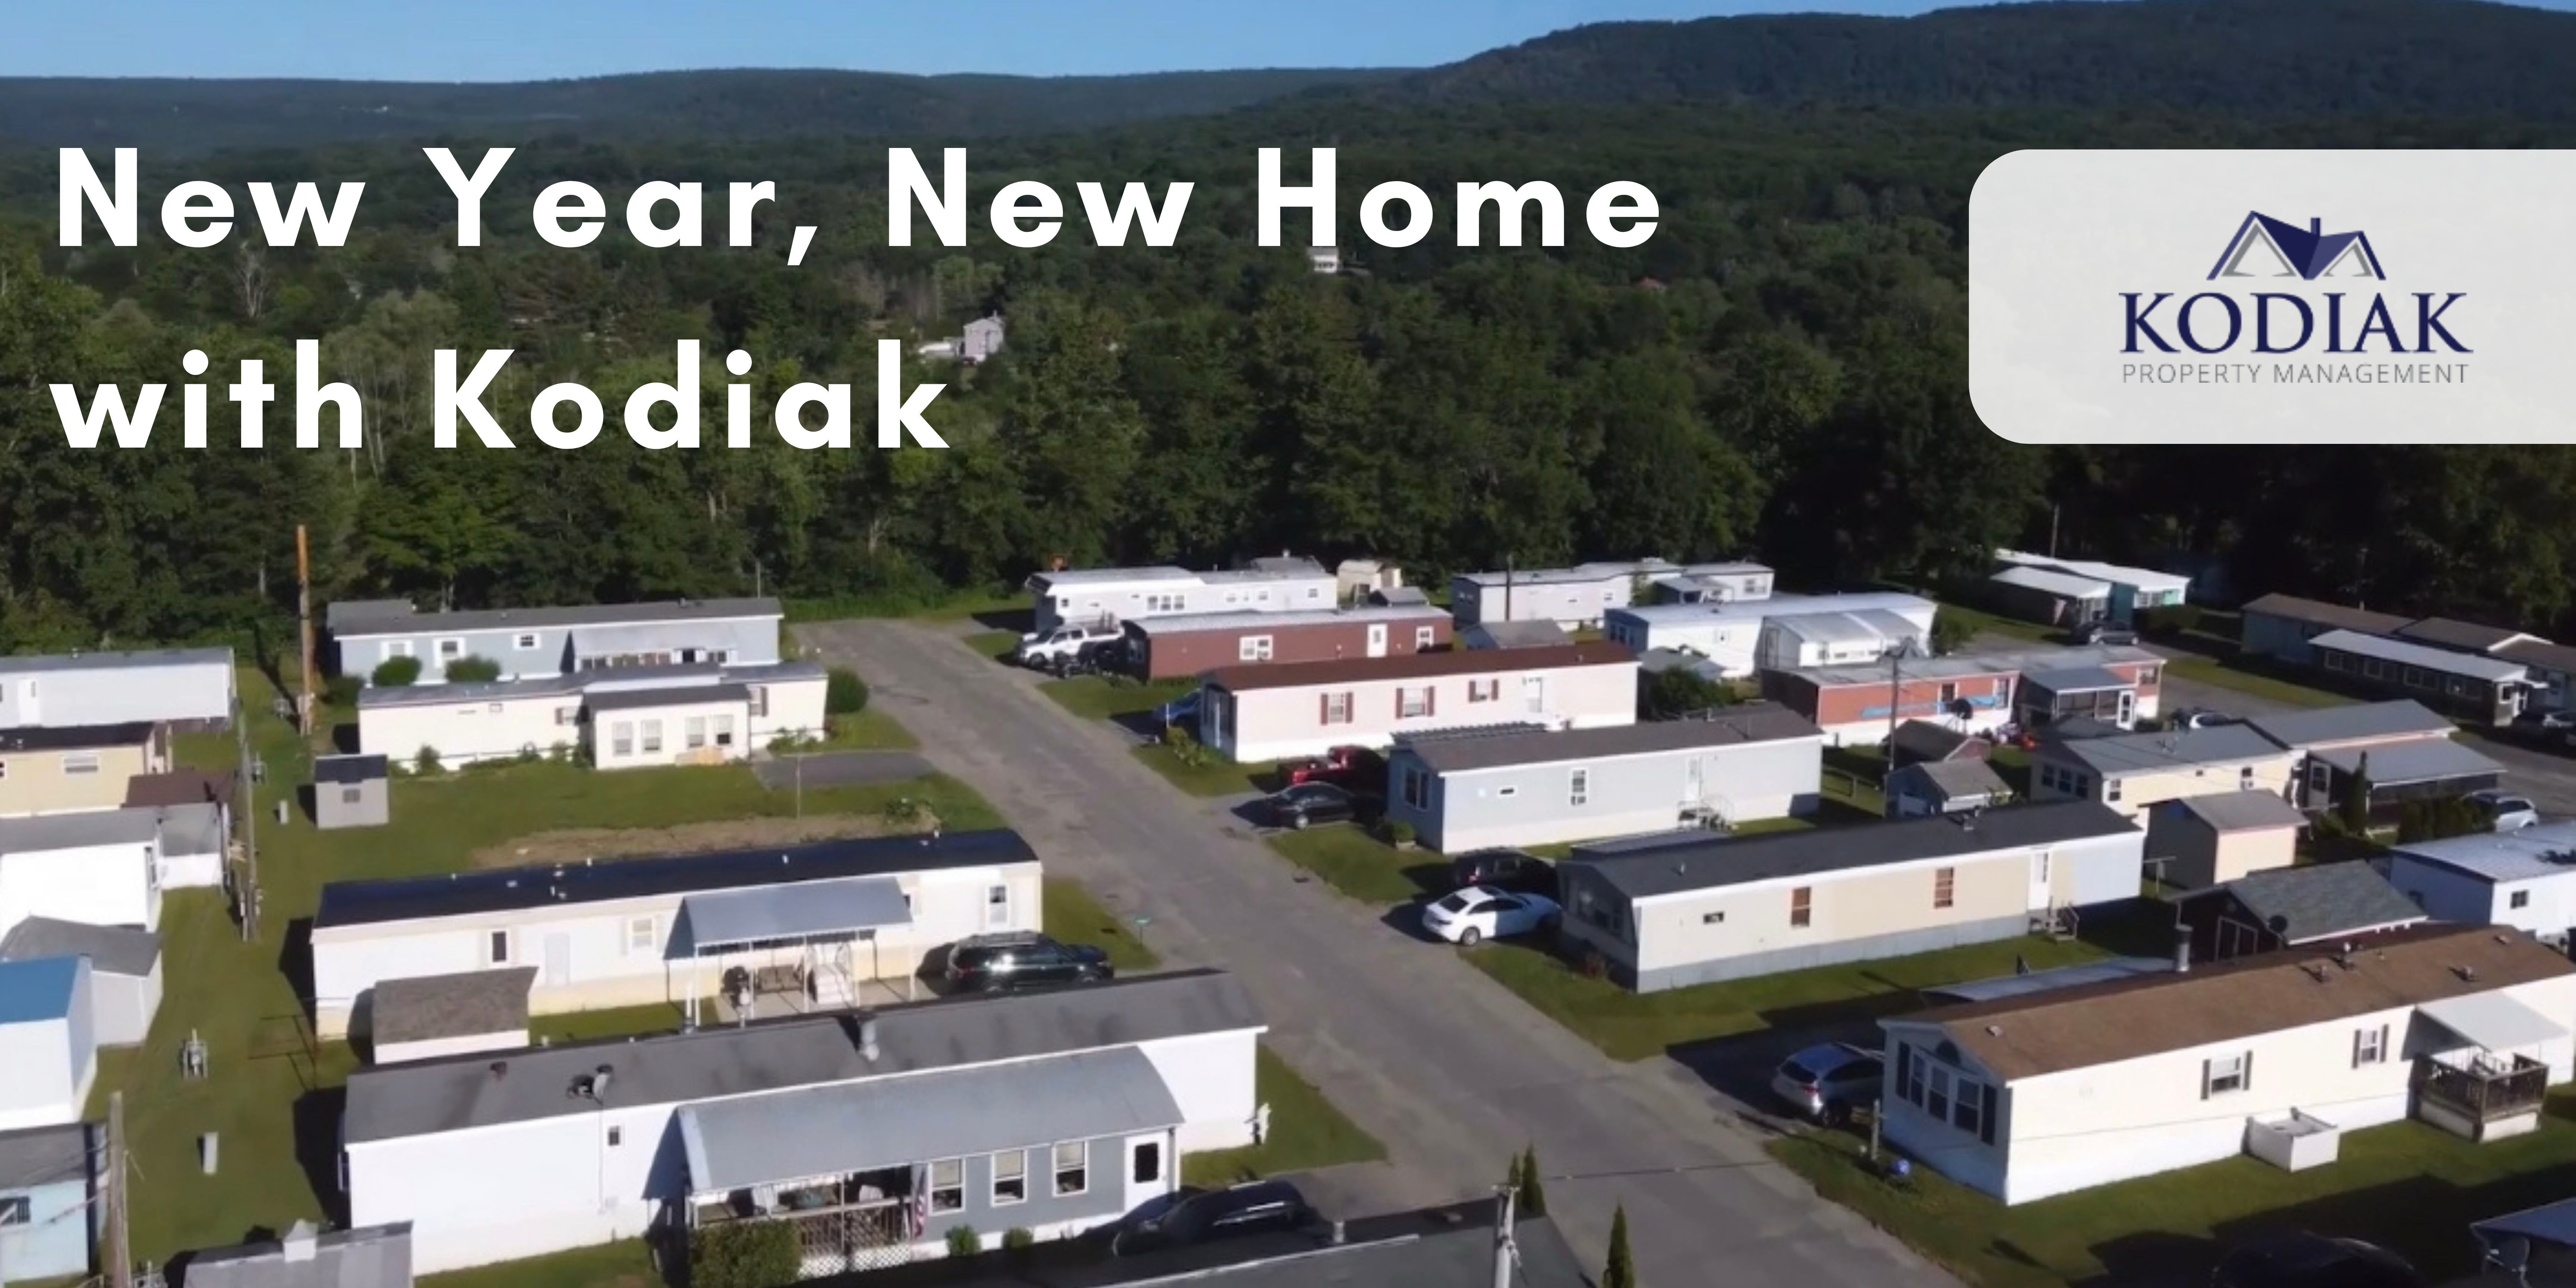 New Year, New Home with Kodiak!